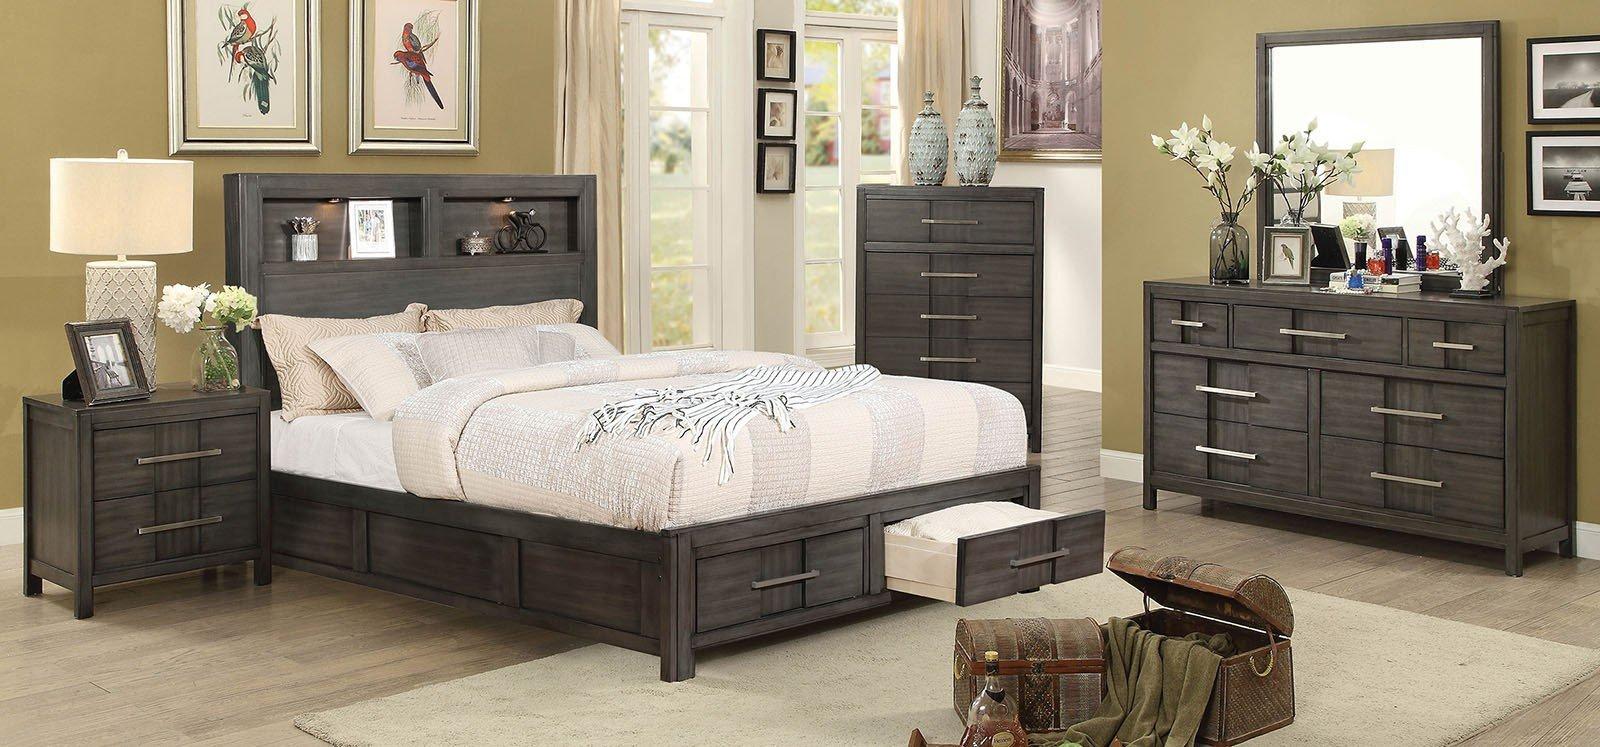 Transitional Storage Bedroom Set KARLA CM7500GY-Q CM7500GY-Q-4PC in Gray Matte